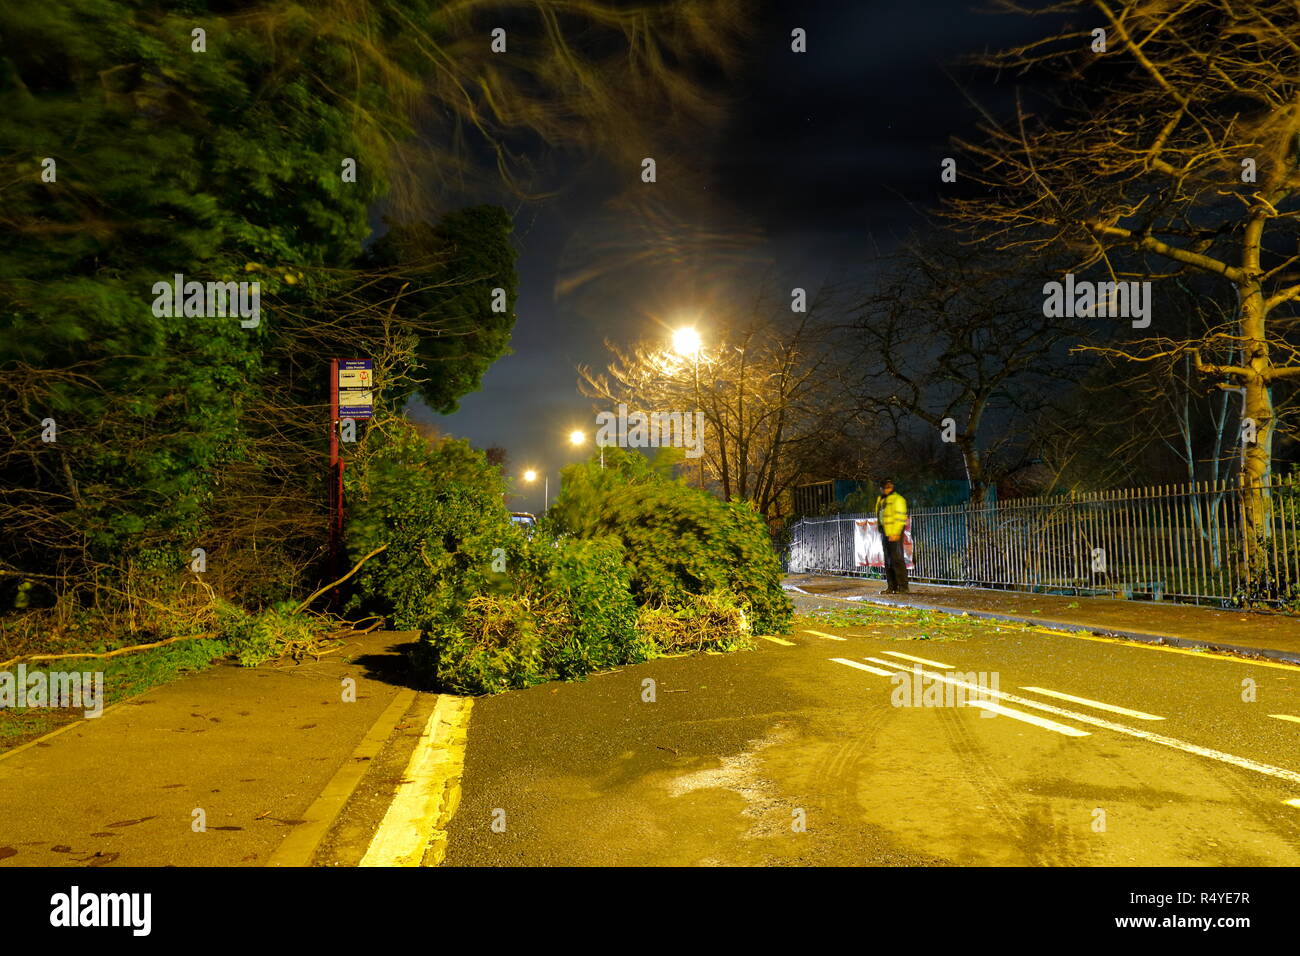 Leeds, West Yorkshire, UK. 28th November 2018. UK Weather: Winds from Storm Diana knocks down tree. A fallen tree has landed and blocked a busy road in Great Preston, between Leeds & Castleford. Maintenance crews were quick on the scene on Leeds Road and one lane was opened under the supervision of a police officer while the remains of the tree was removed. Credit: Yorkshire Pics/Alamy Live News Stock Photo